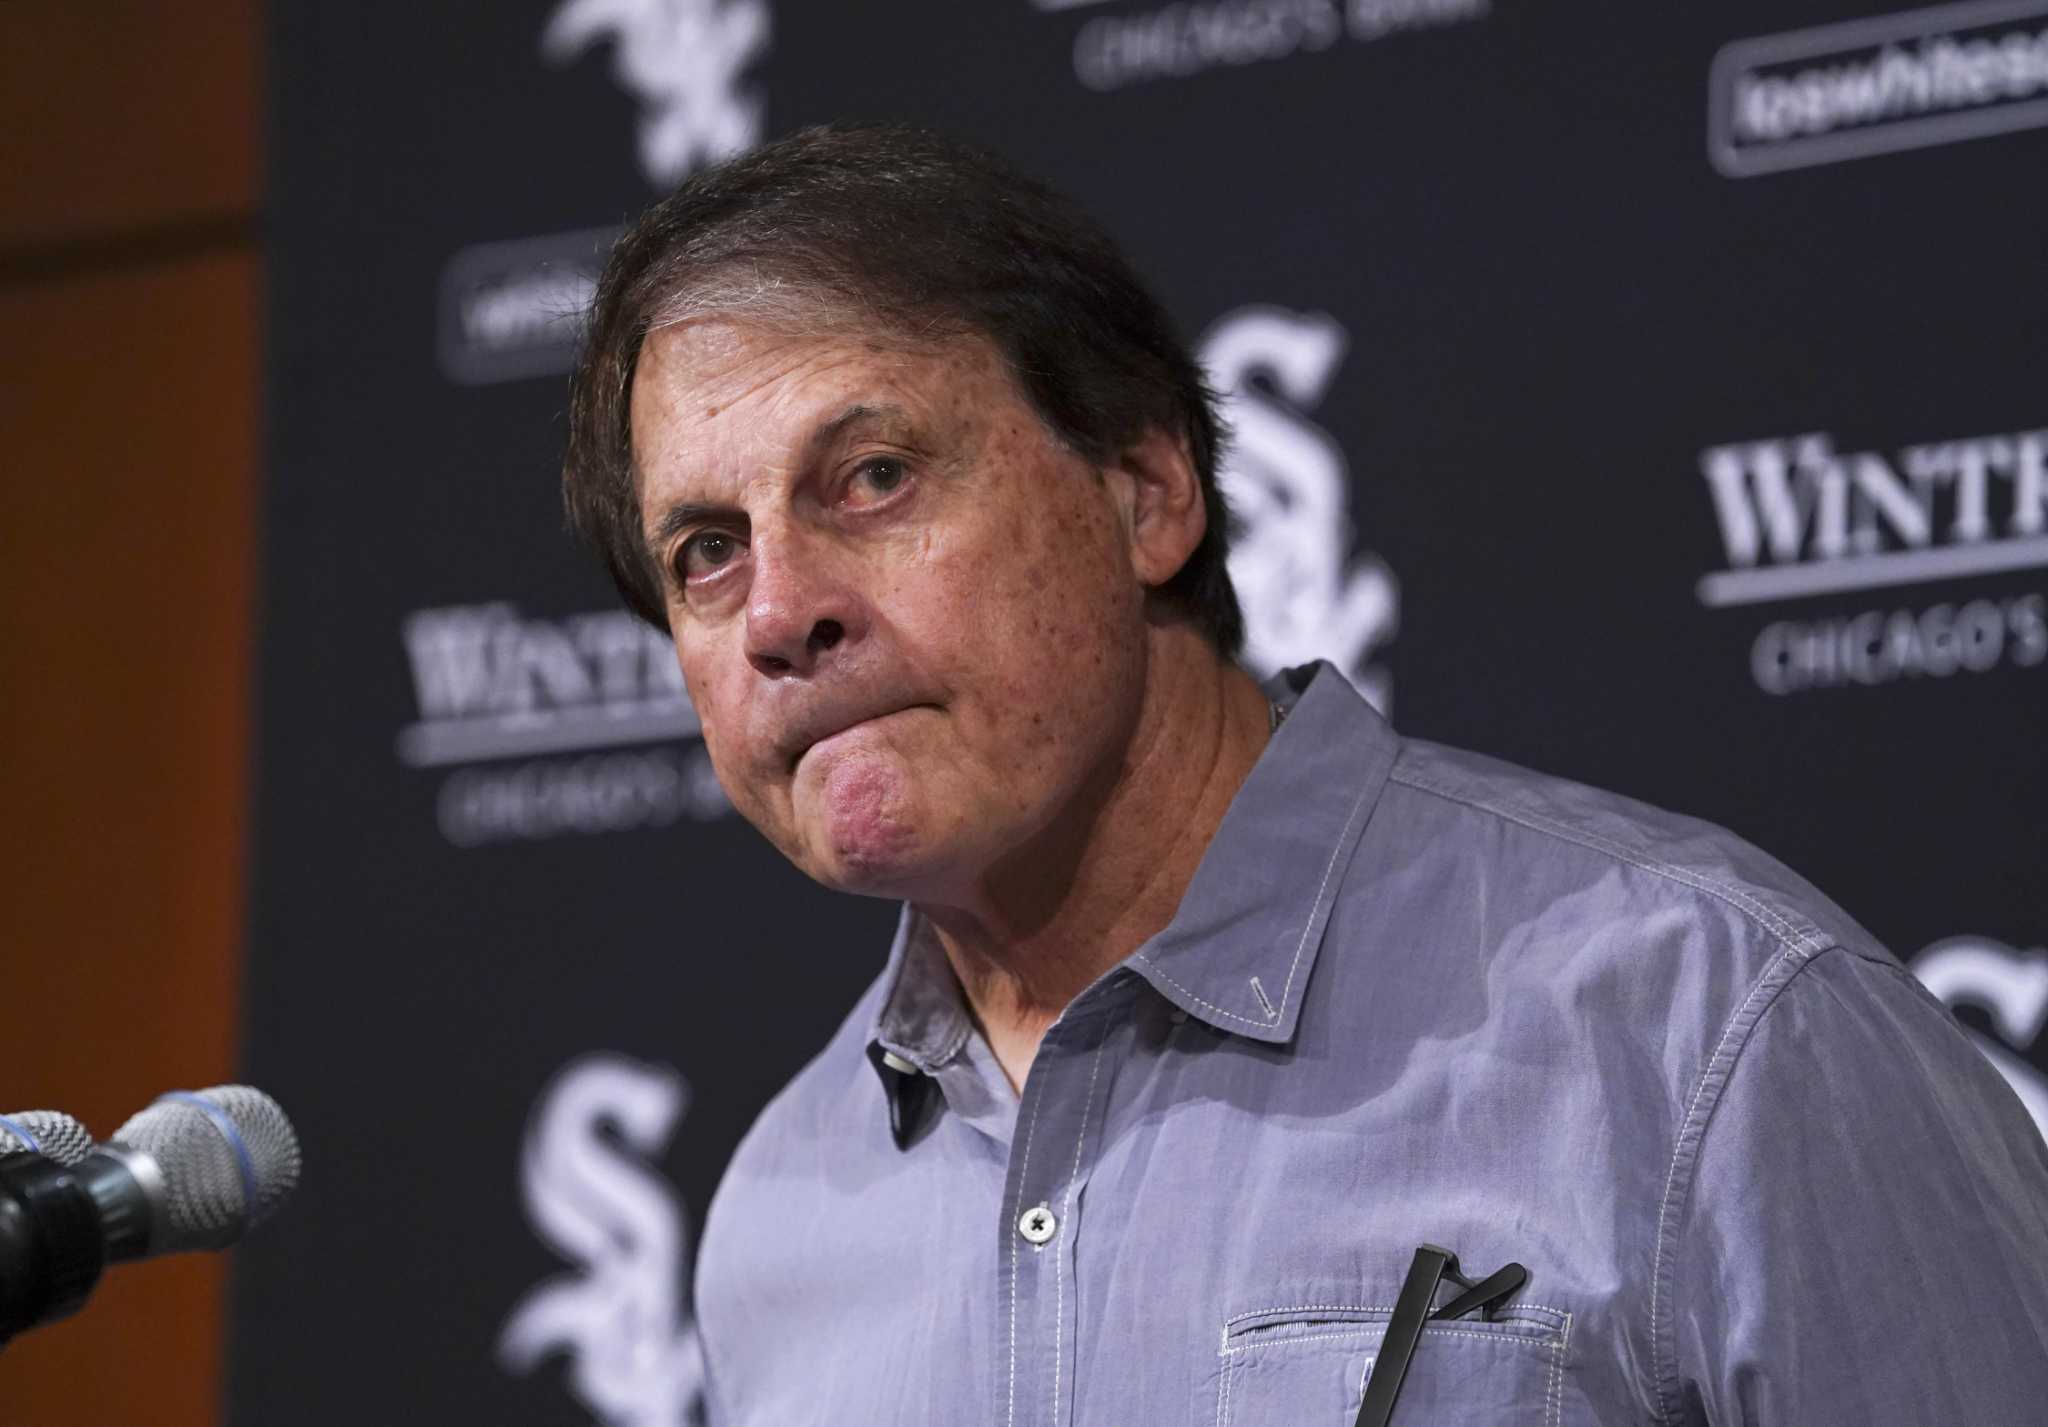 WSox manager La Russa out indefinitely with health issue